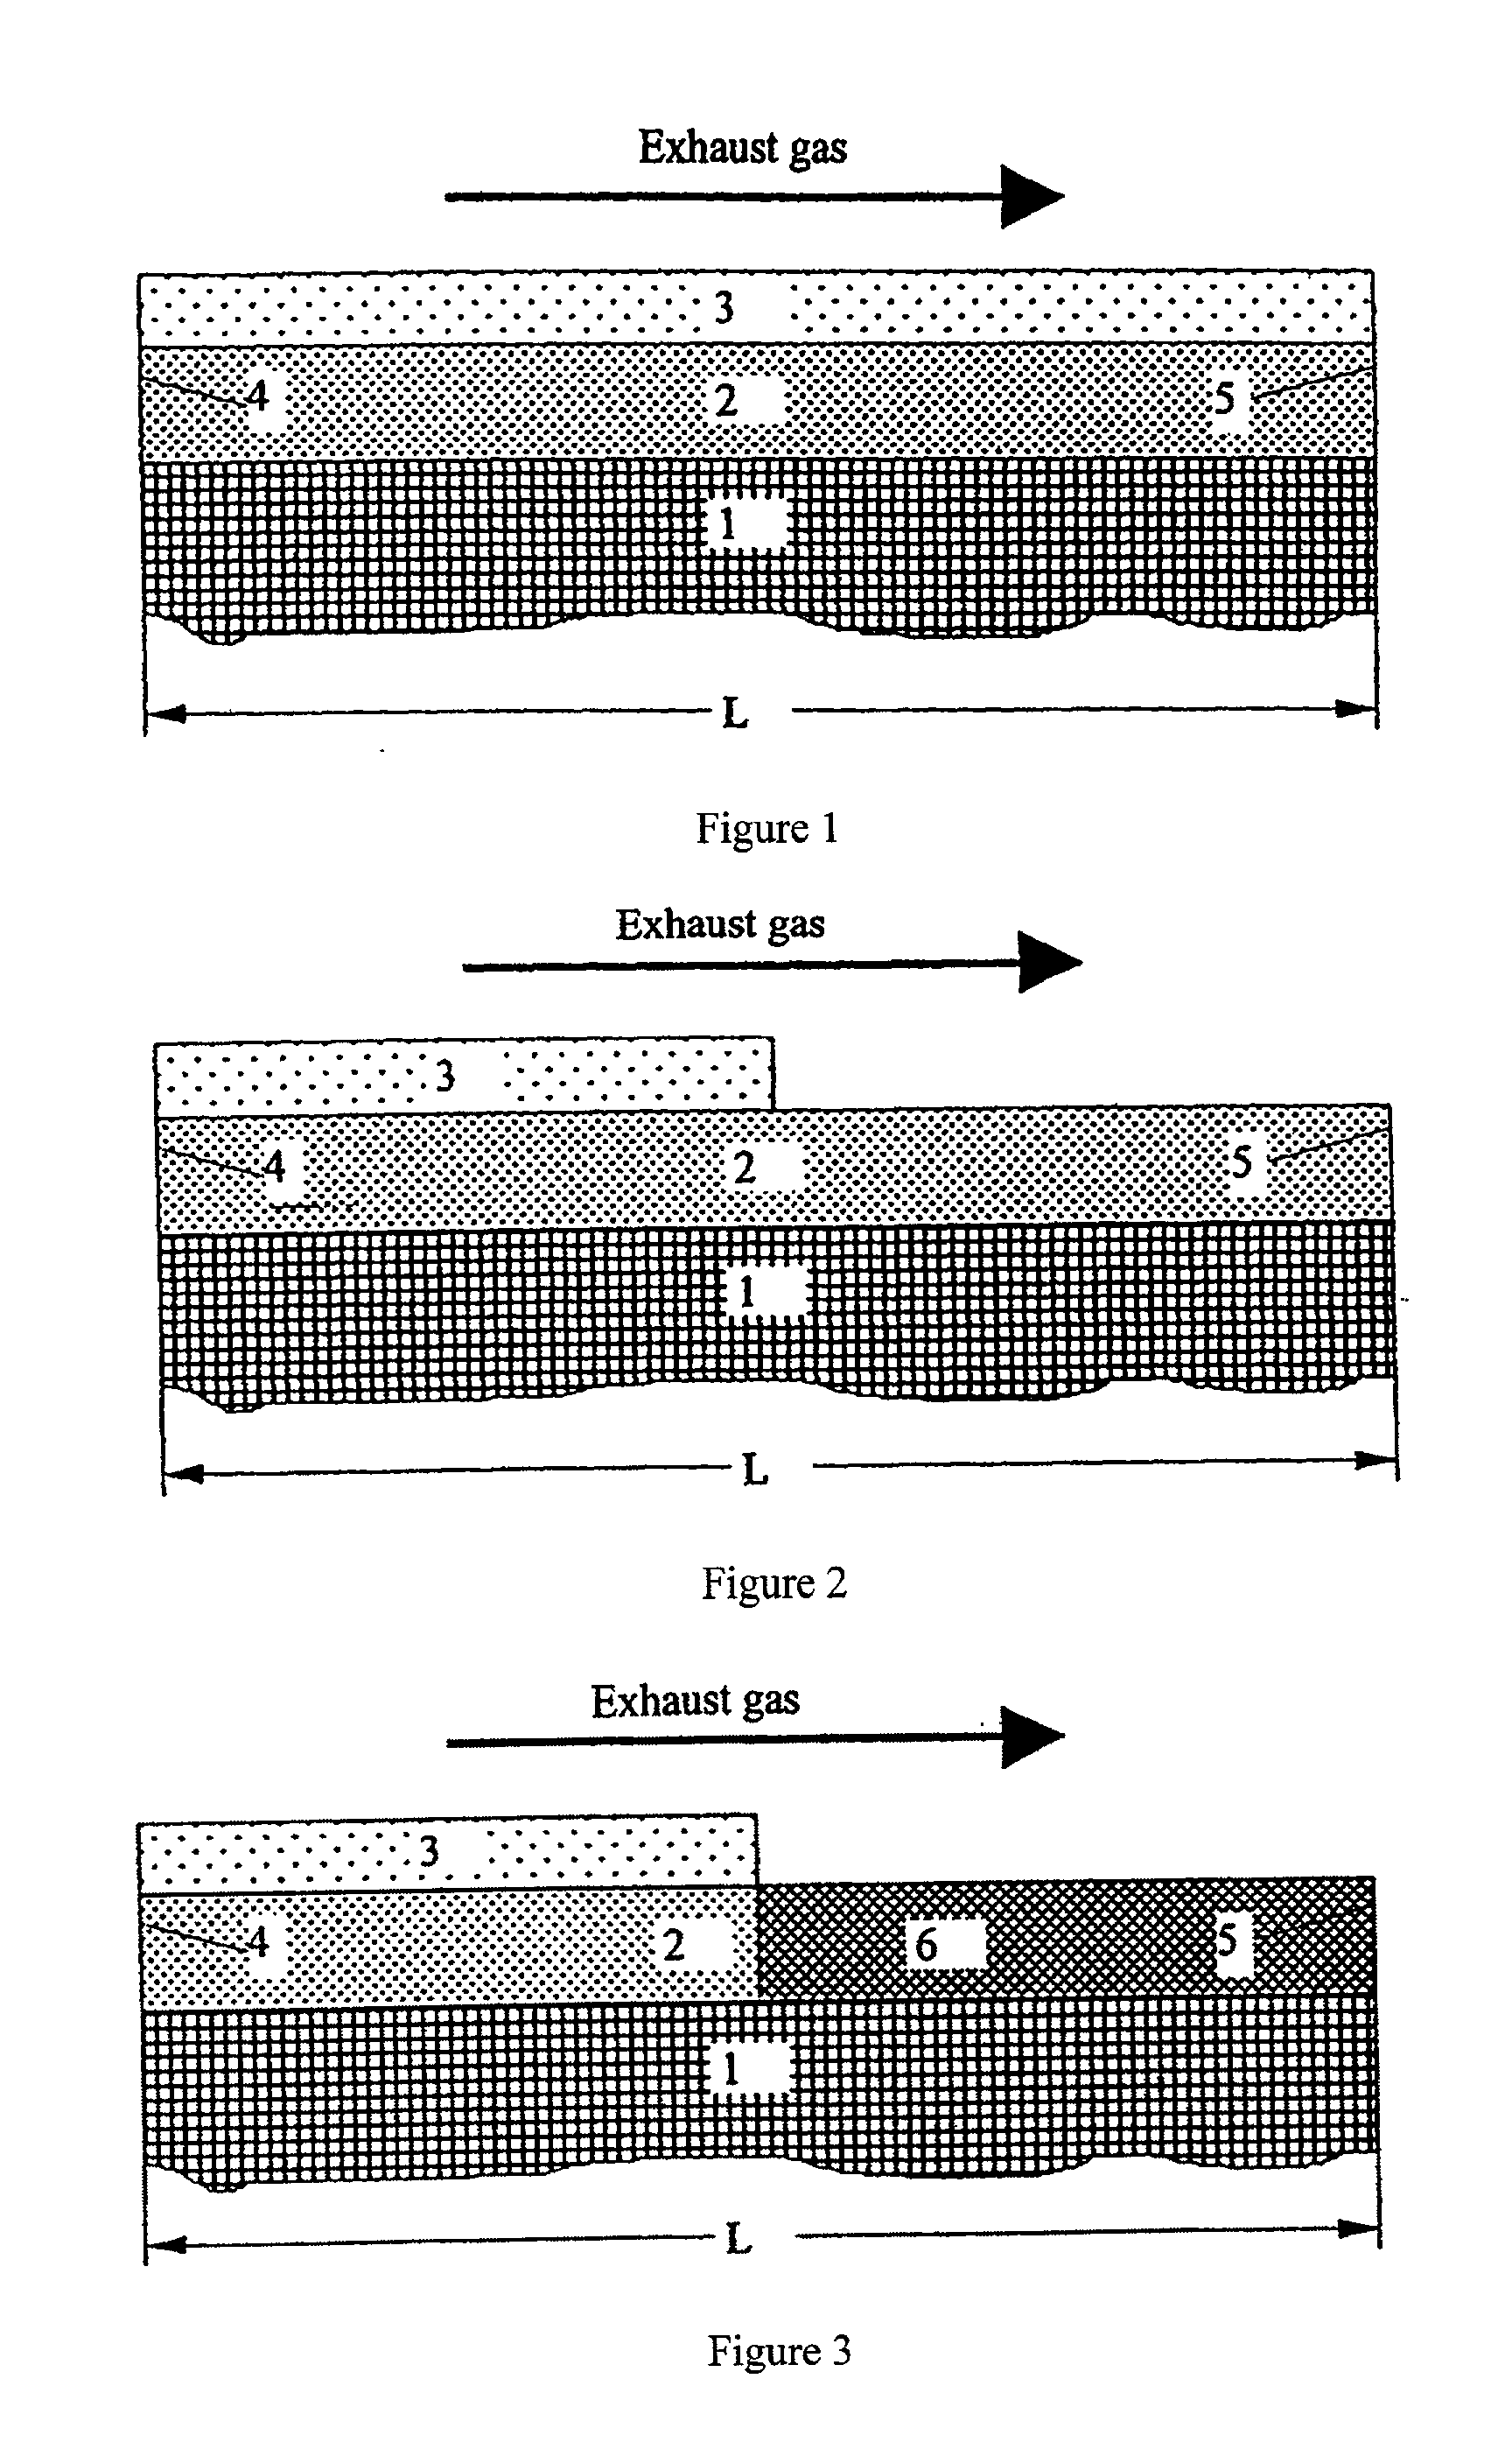 Structured catalysts for selective reduction of nitrogen oxides by ammonia using a compound that can be hydrolyzed to ammonia